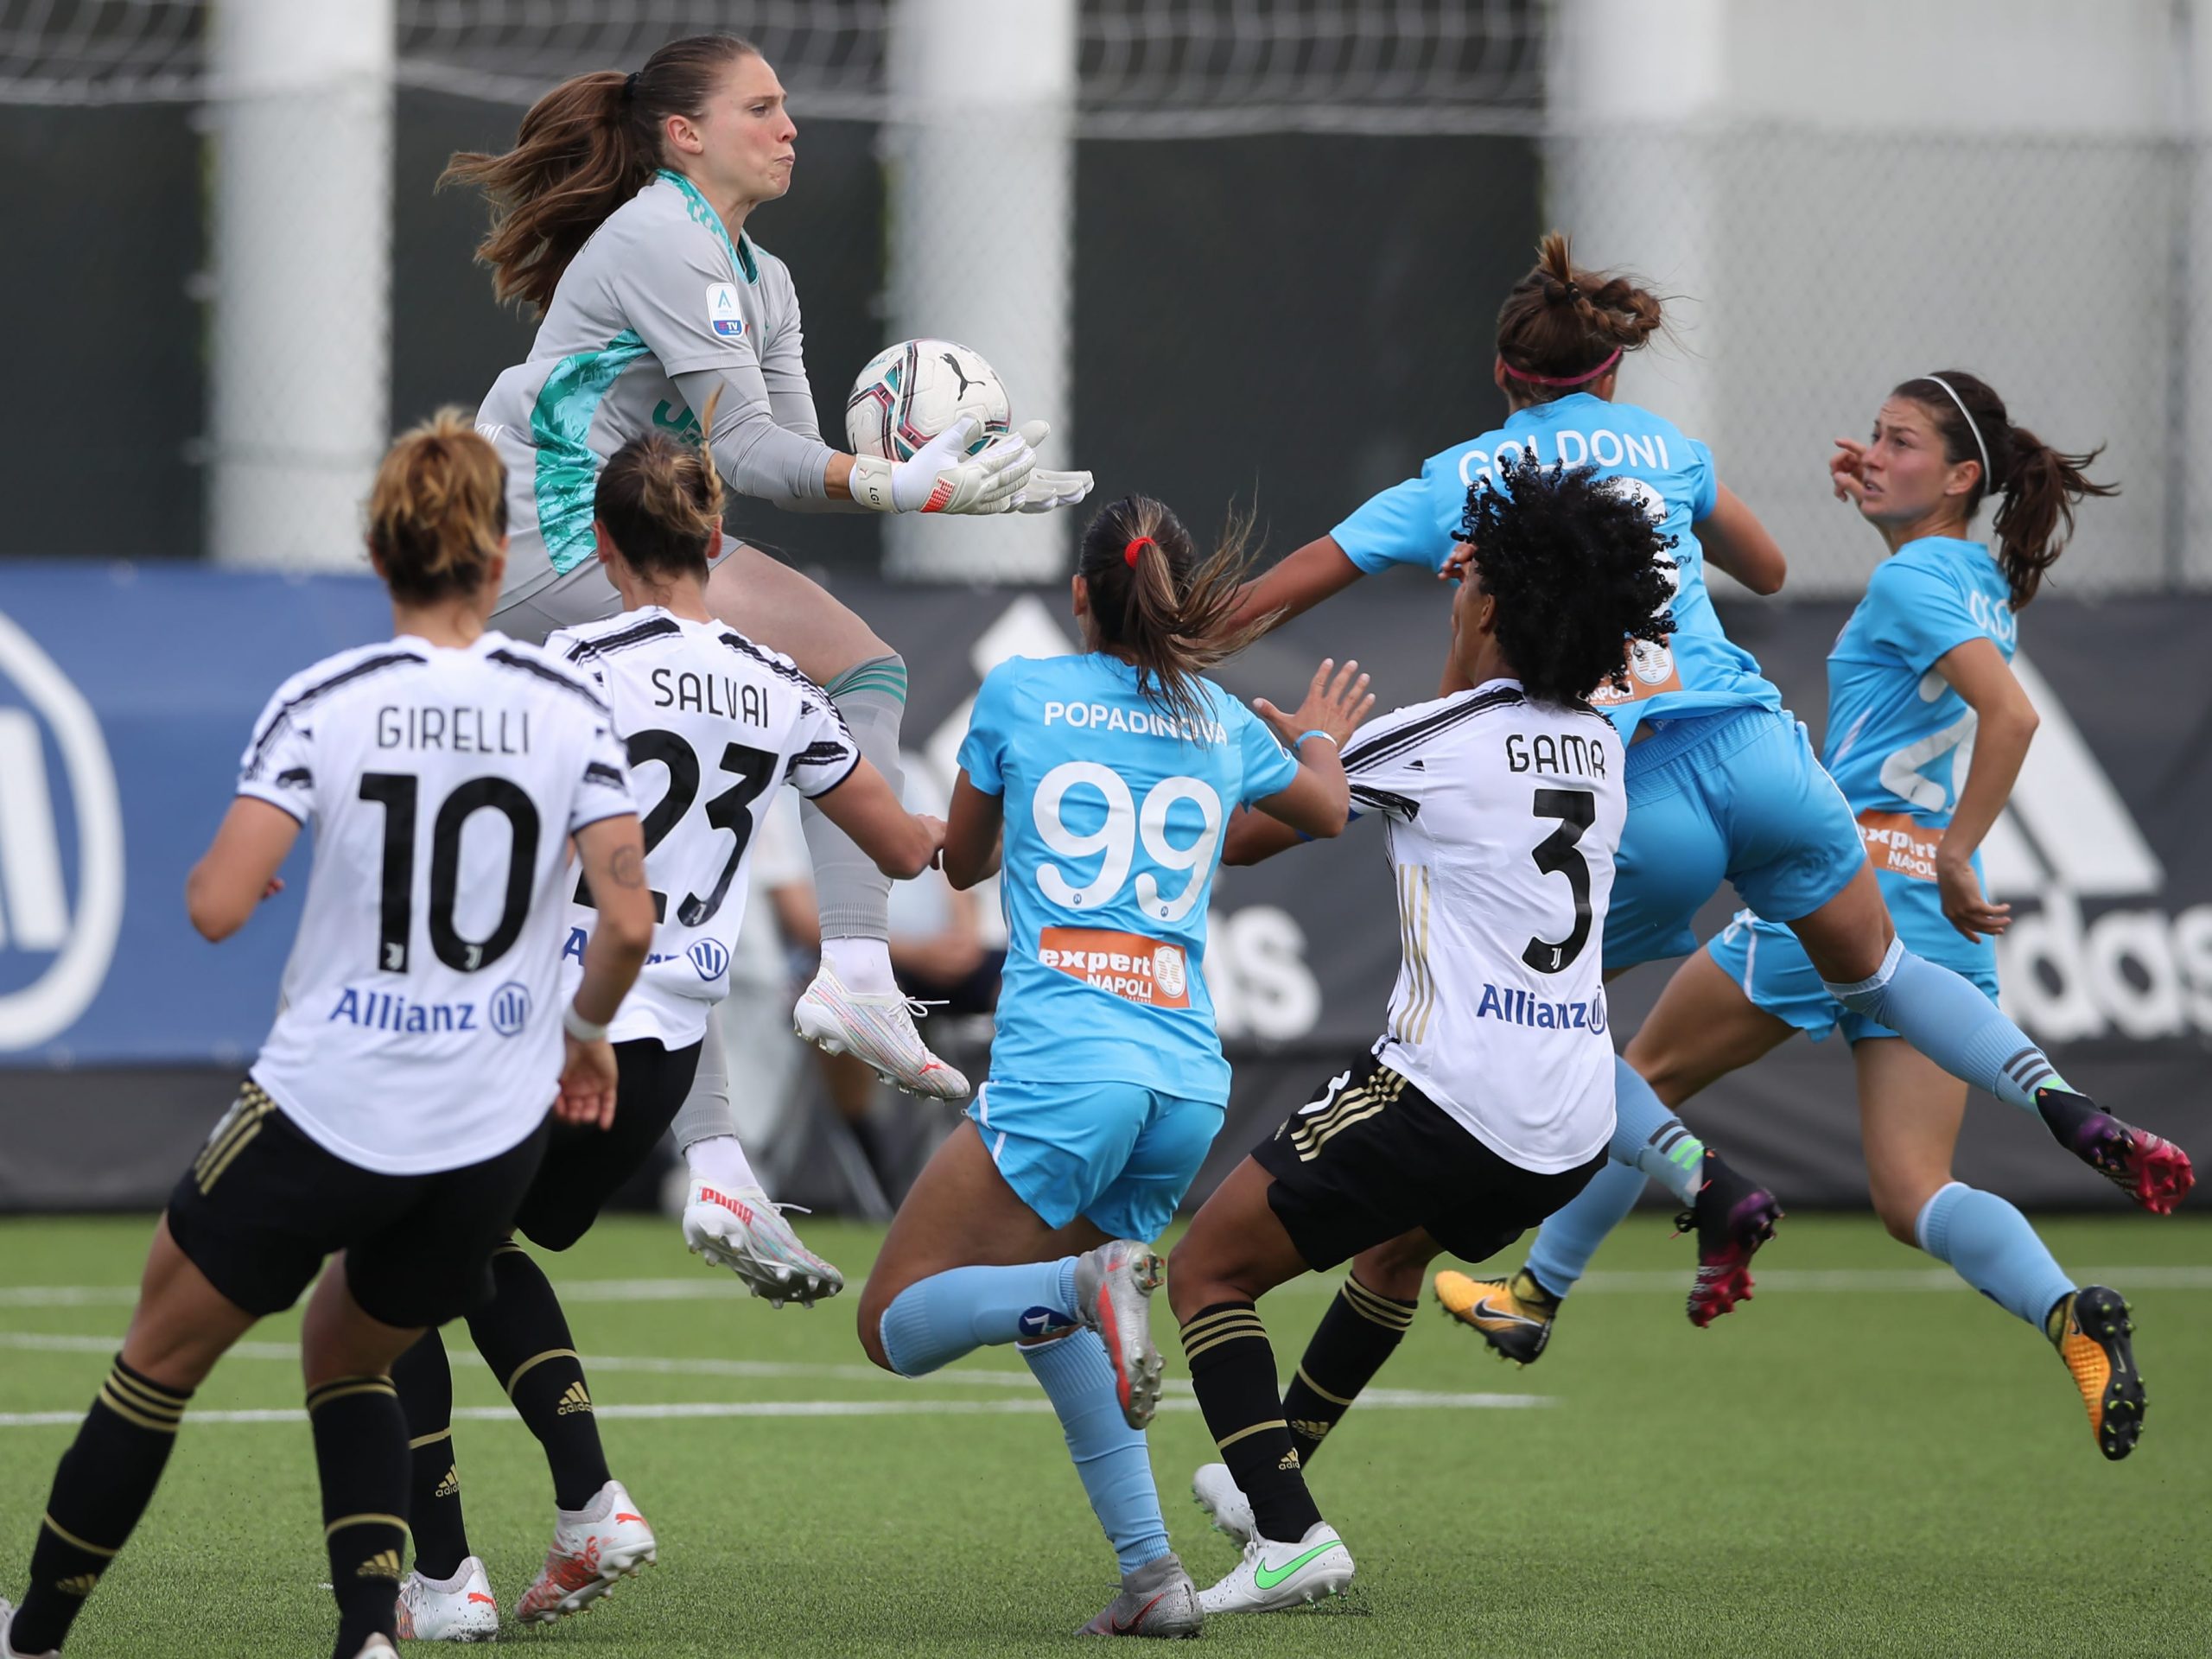 Members of Juventus FC's women's team in black and white uniforms face off in a Women Serie A match in May 2021.